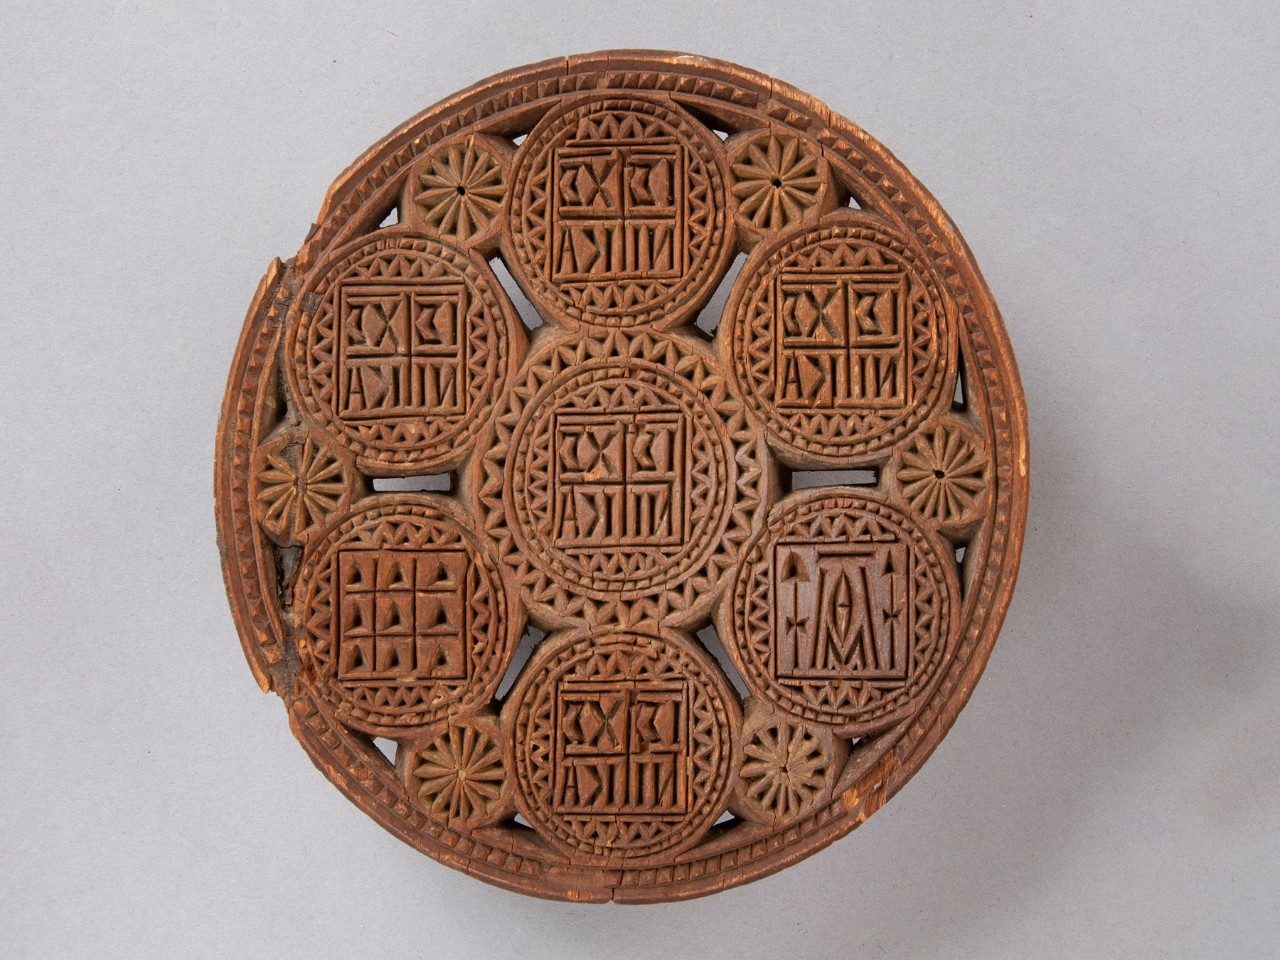 Intricately carved, round wooden seal consisting of several connected circles containing Christian symbols and motifs.